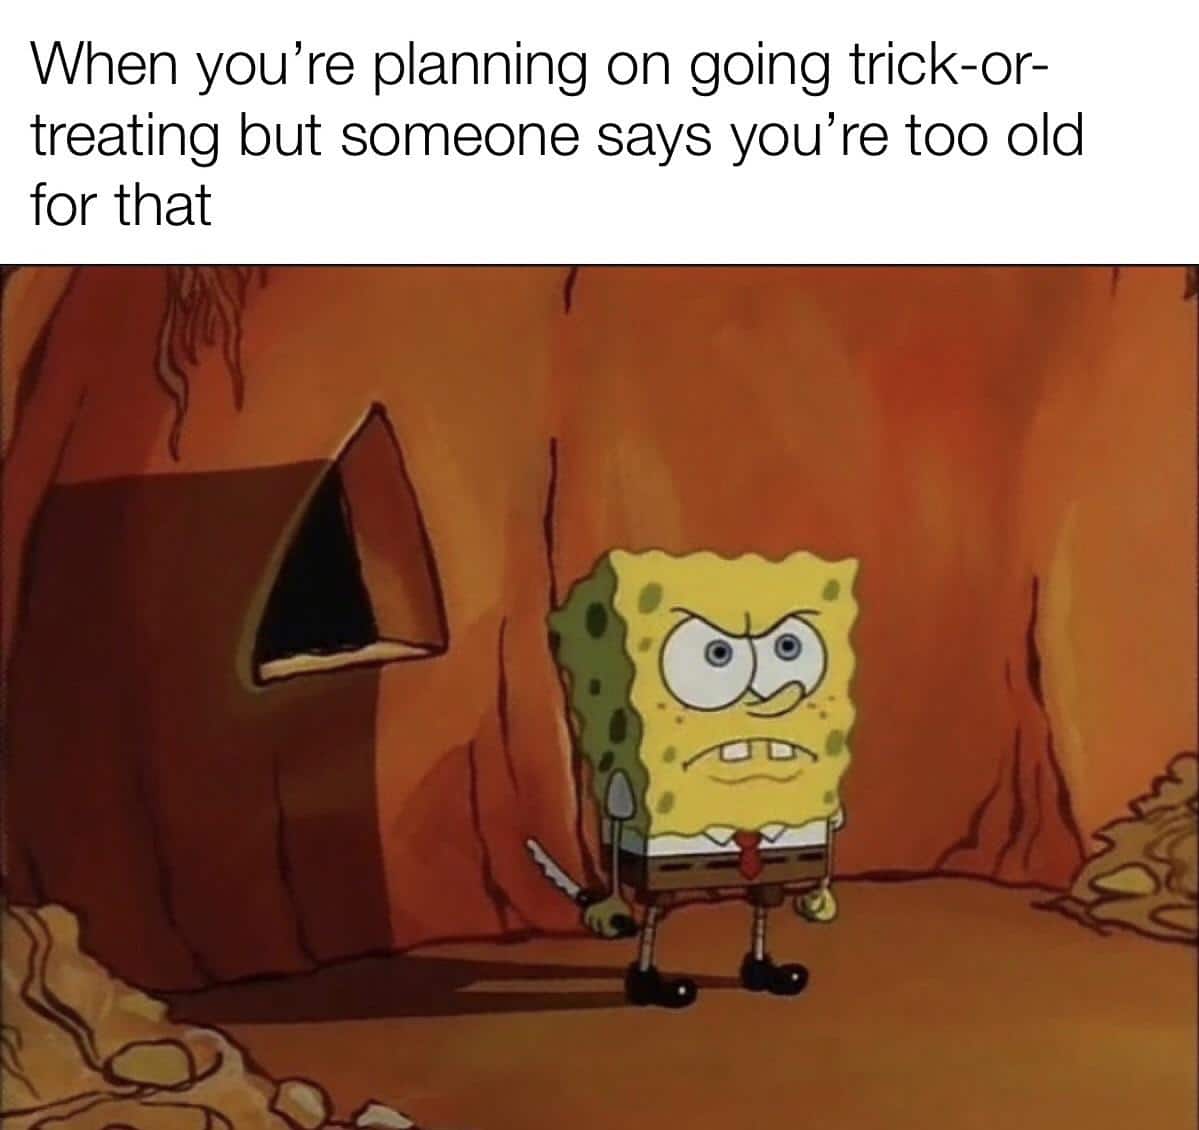 spongebob spongebob-memes spongebob text: When you're planning on going trick-or- treating but someone says you're too old for that 